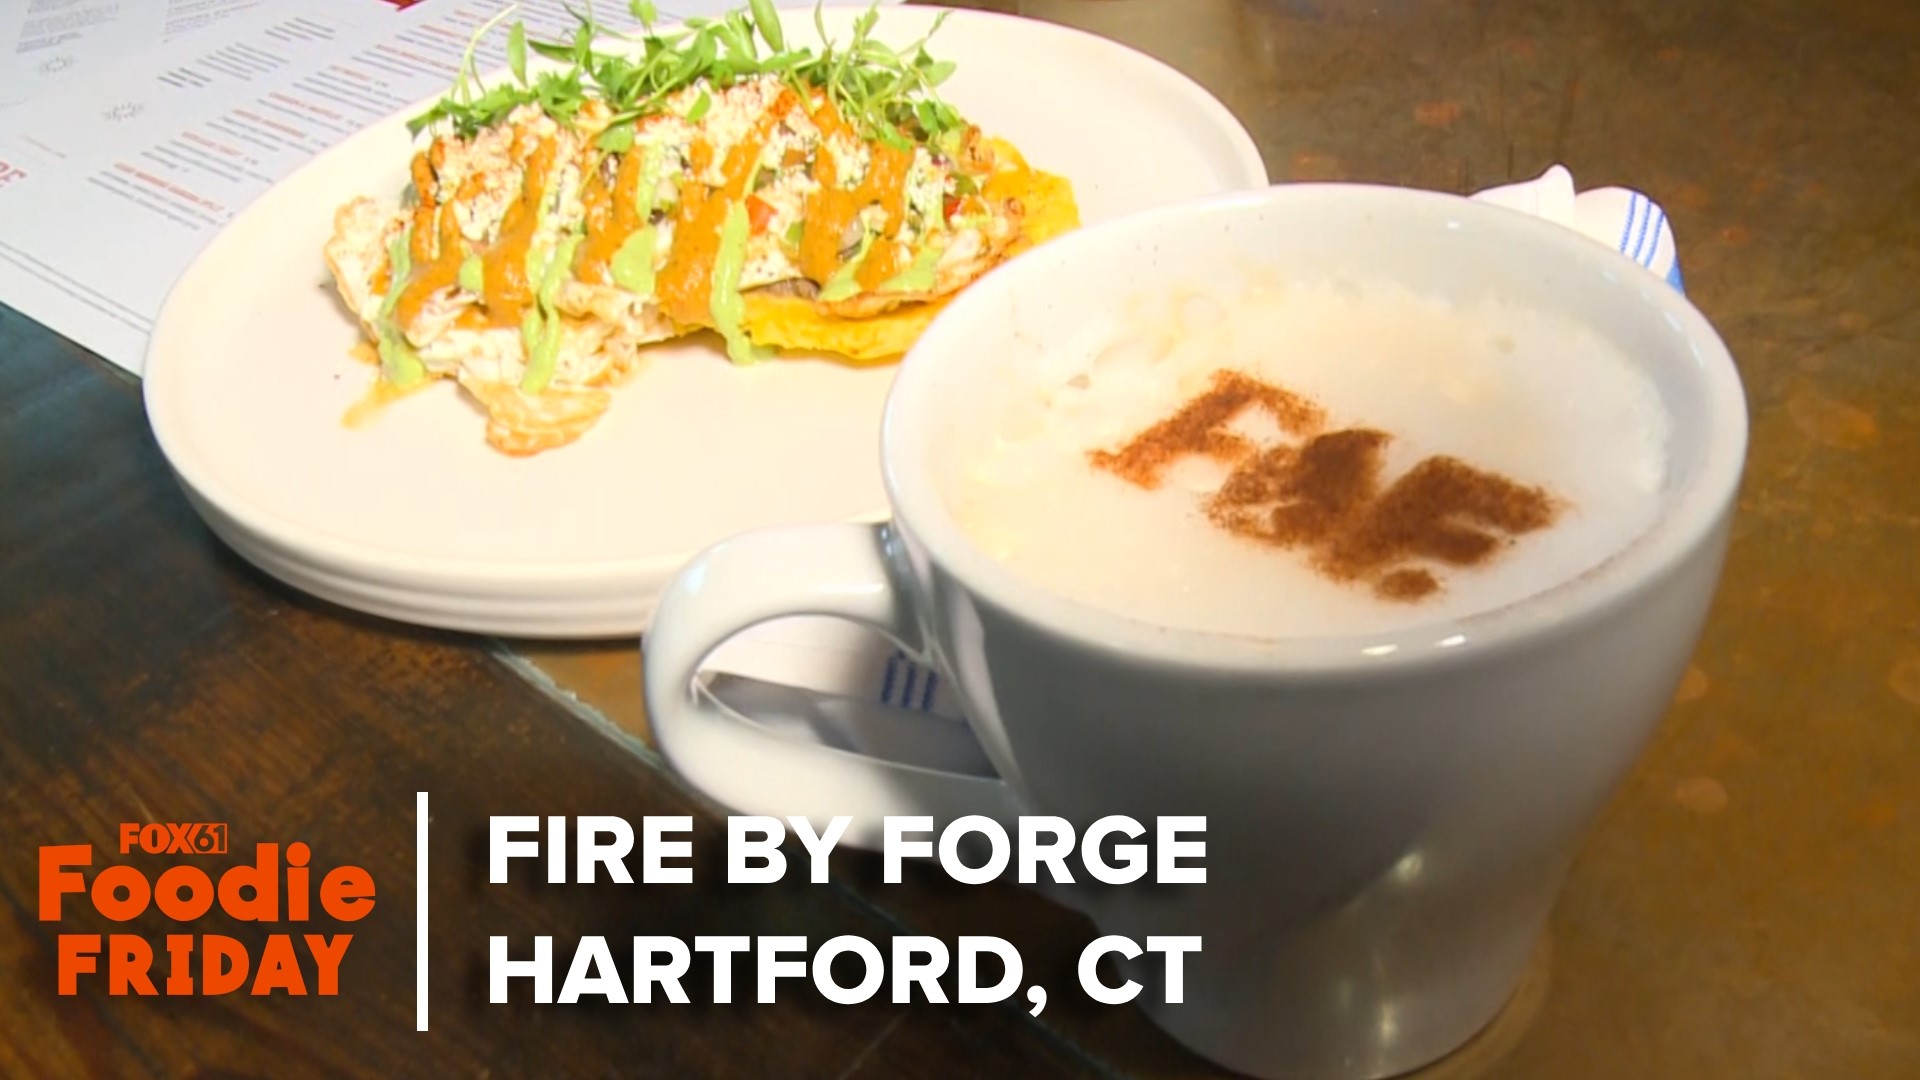 FOX61's Rachel Piscitelli visits Fire by Forge in Hartford for this week's Foodie Friday.